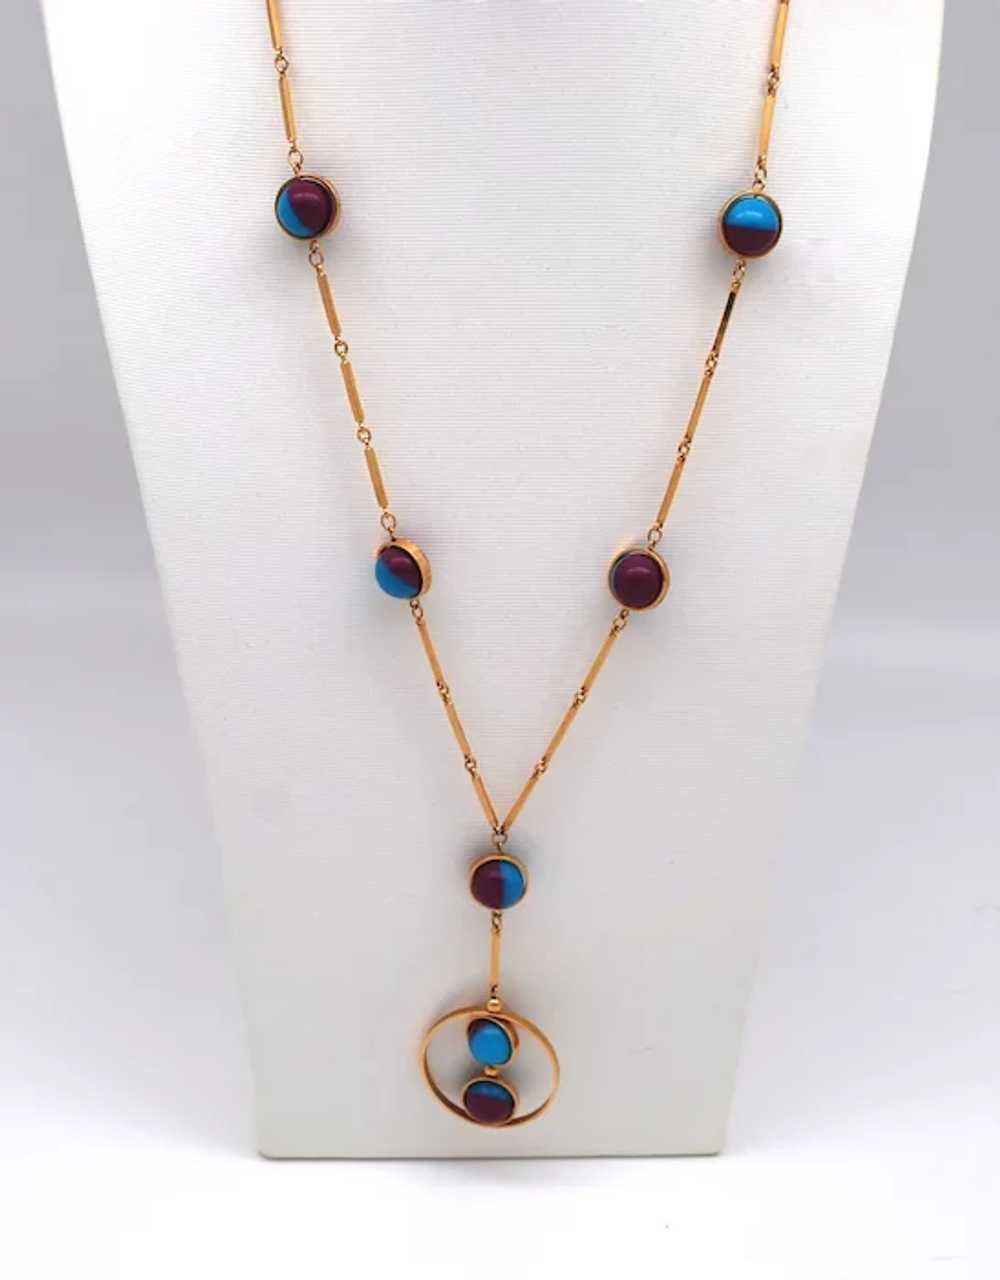 Mod Two Tone Bead and Metal Necklace With Pendant - image 2